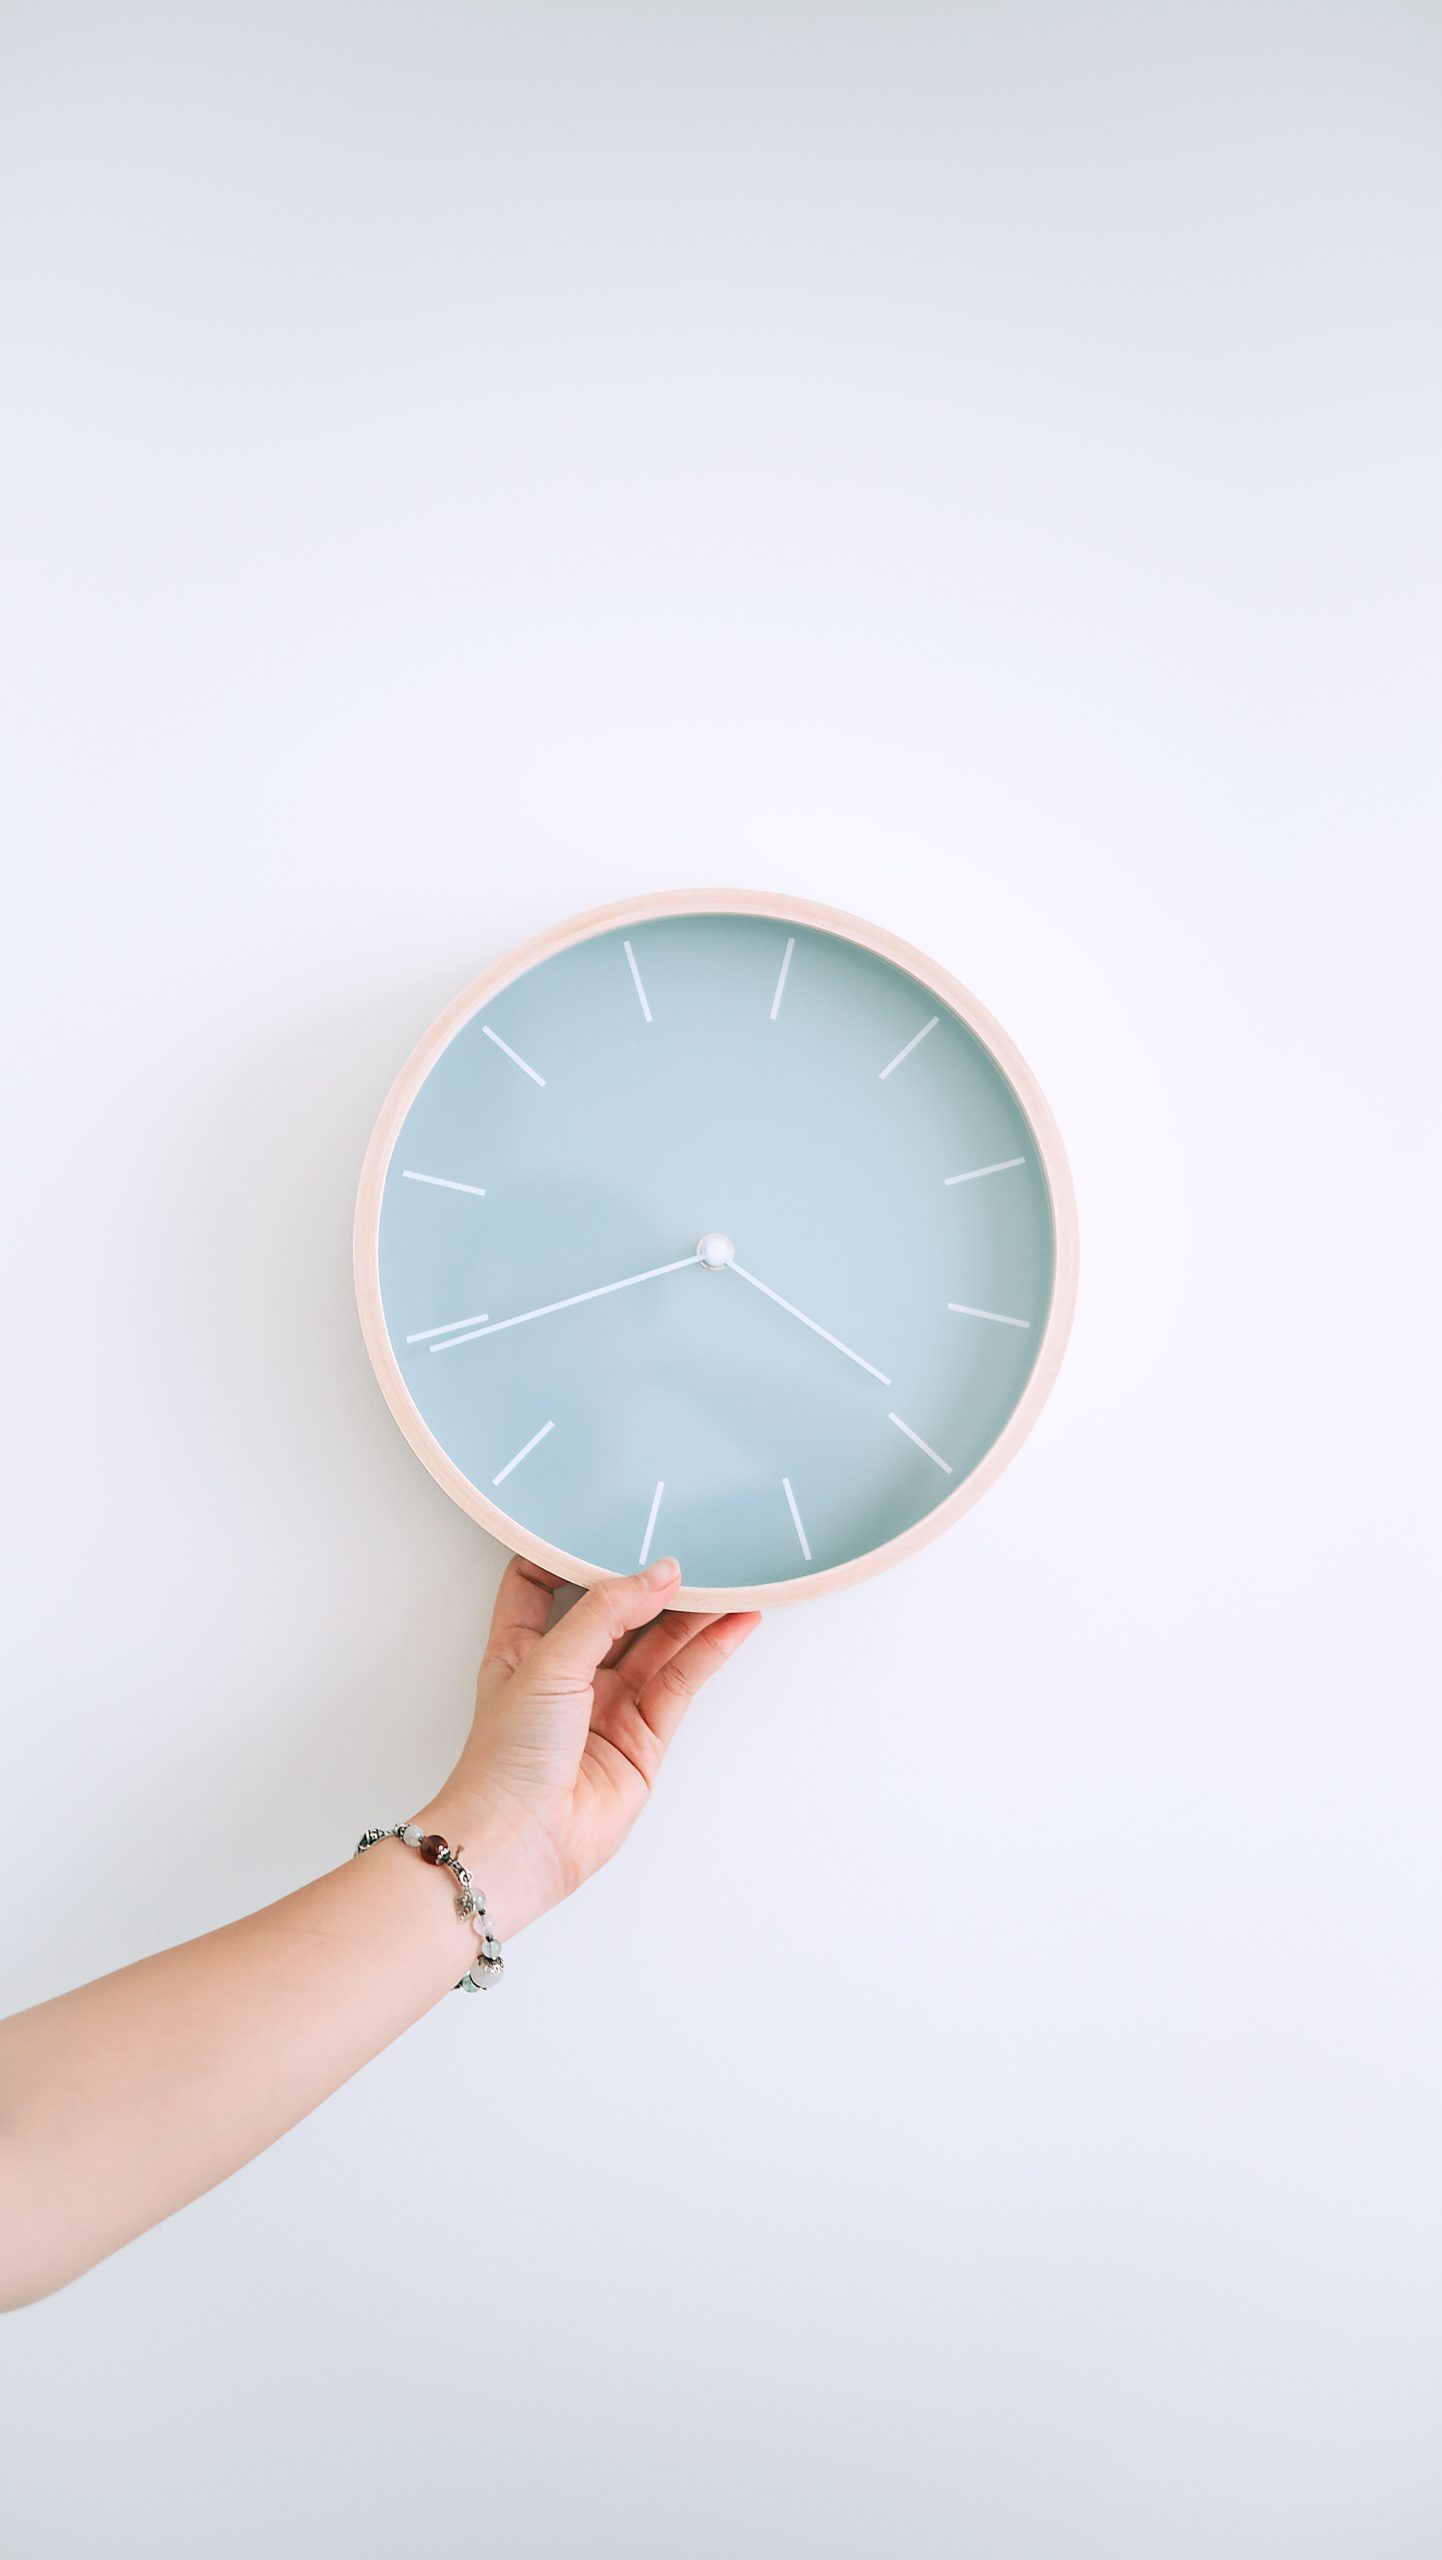 How to manage your time effectively